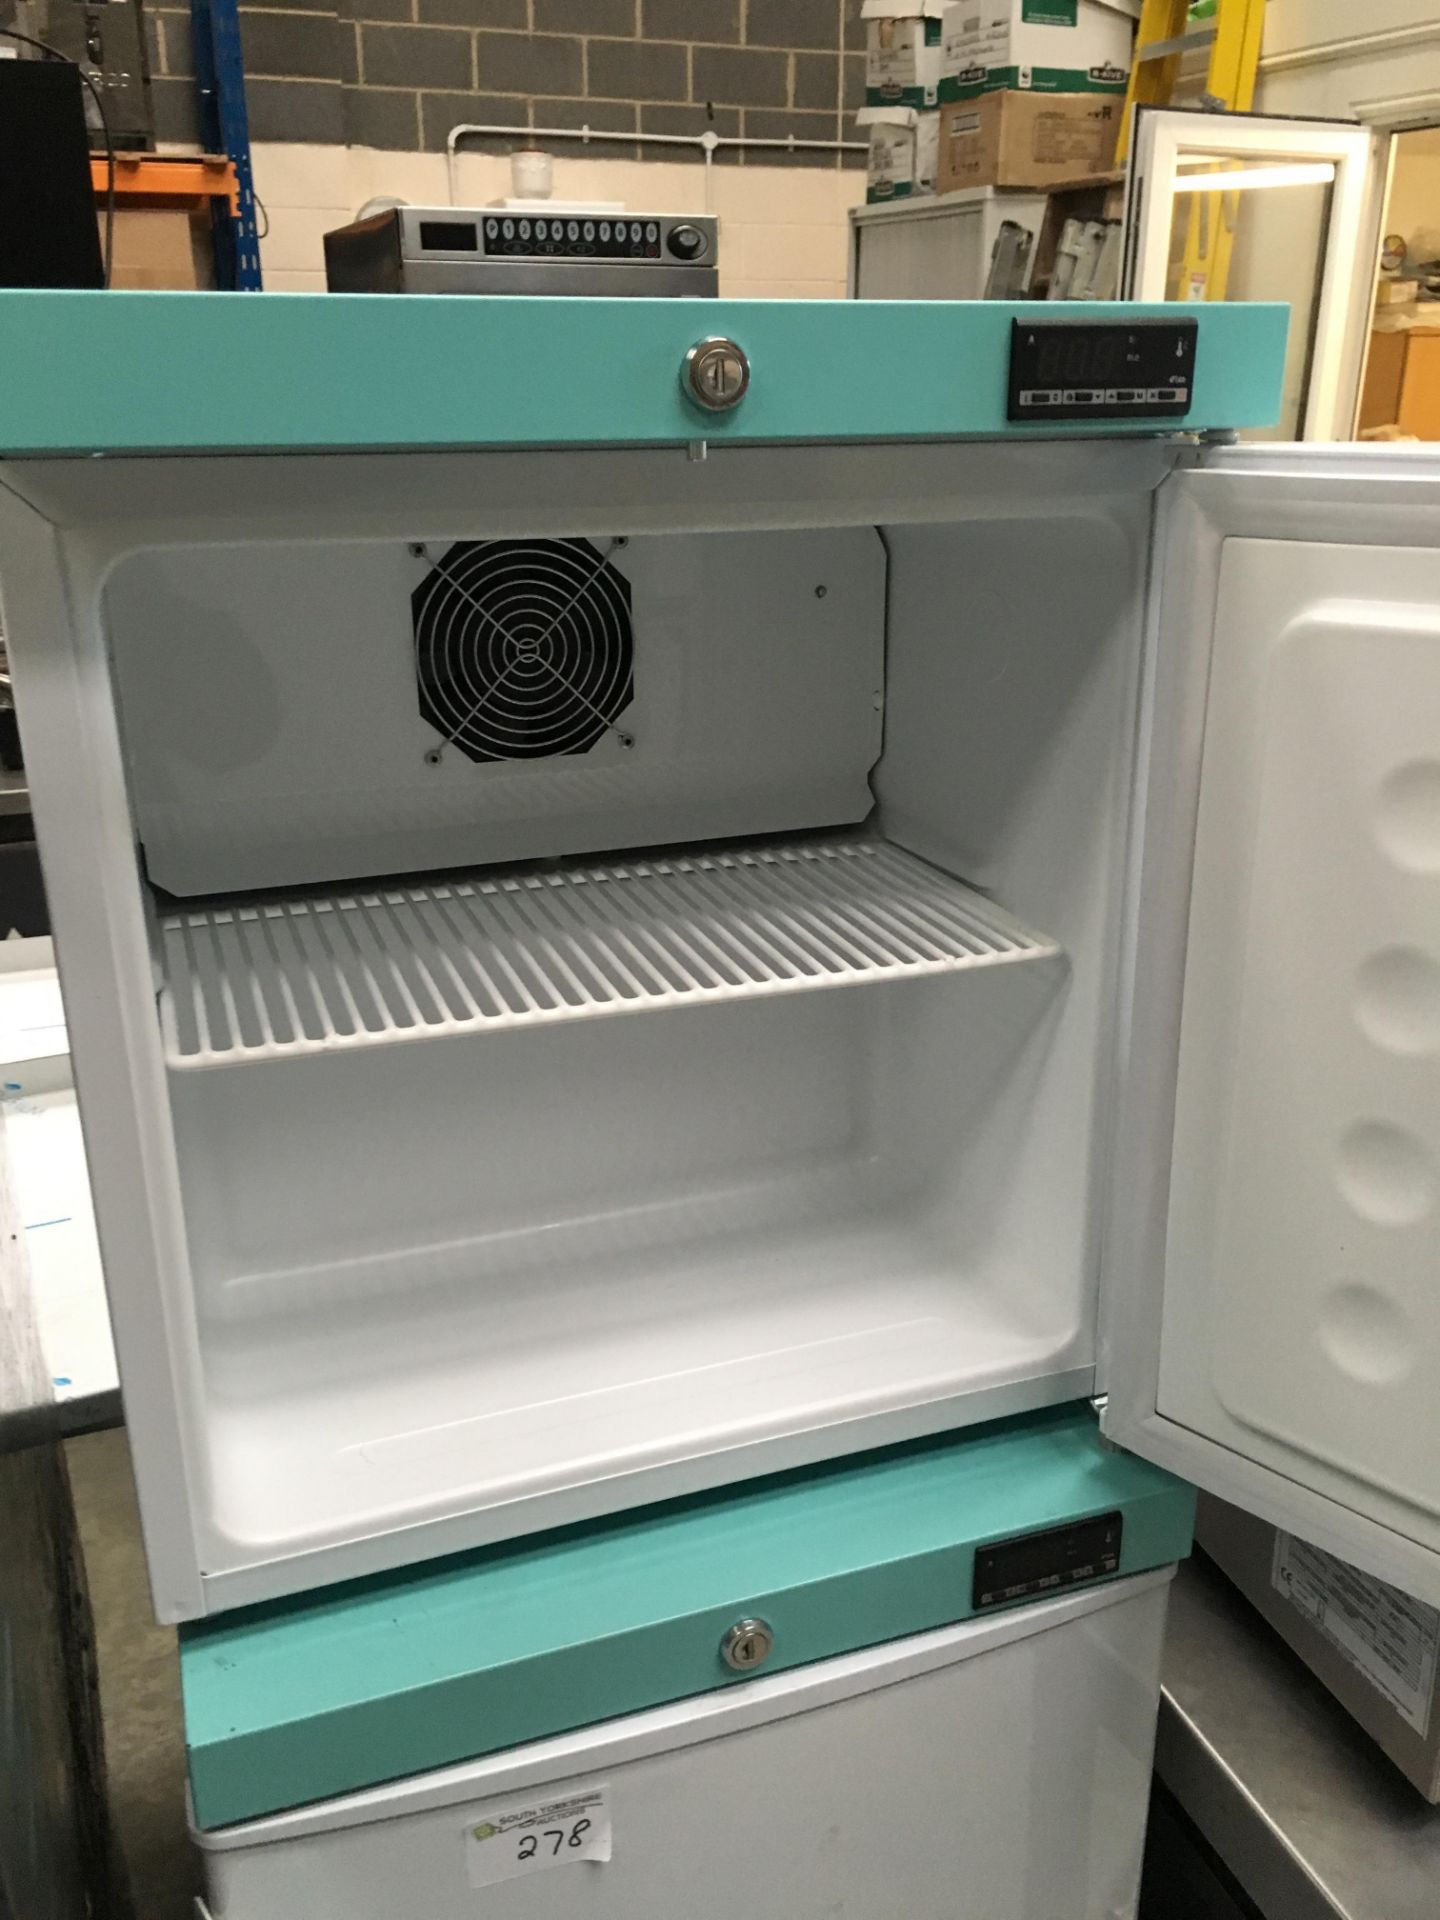 Small white counter top fridge - Image 2 of 2